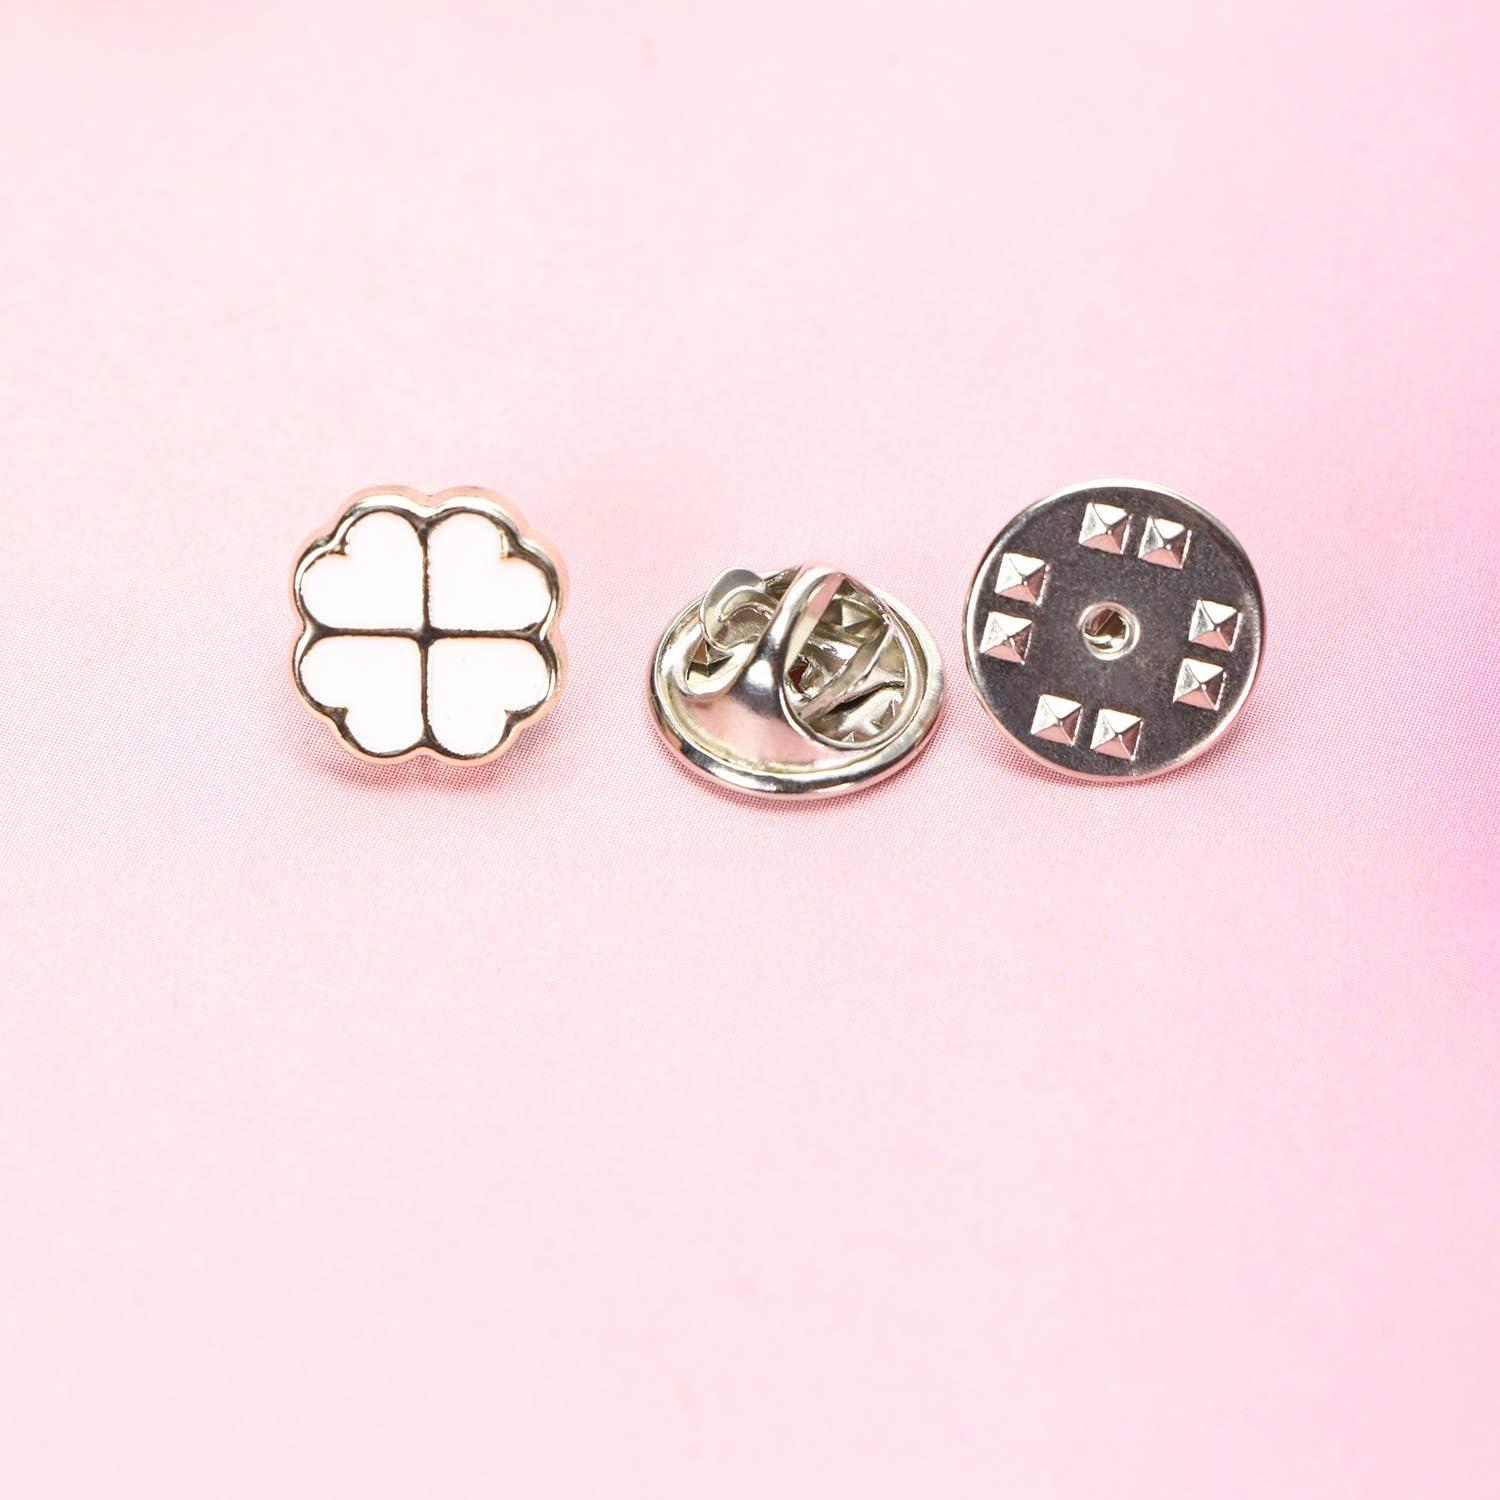 Button Covers Women Shirts, Safety Brooch Buttons